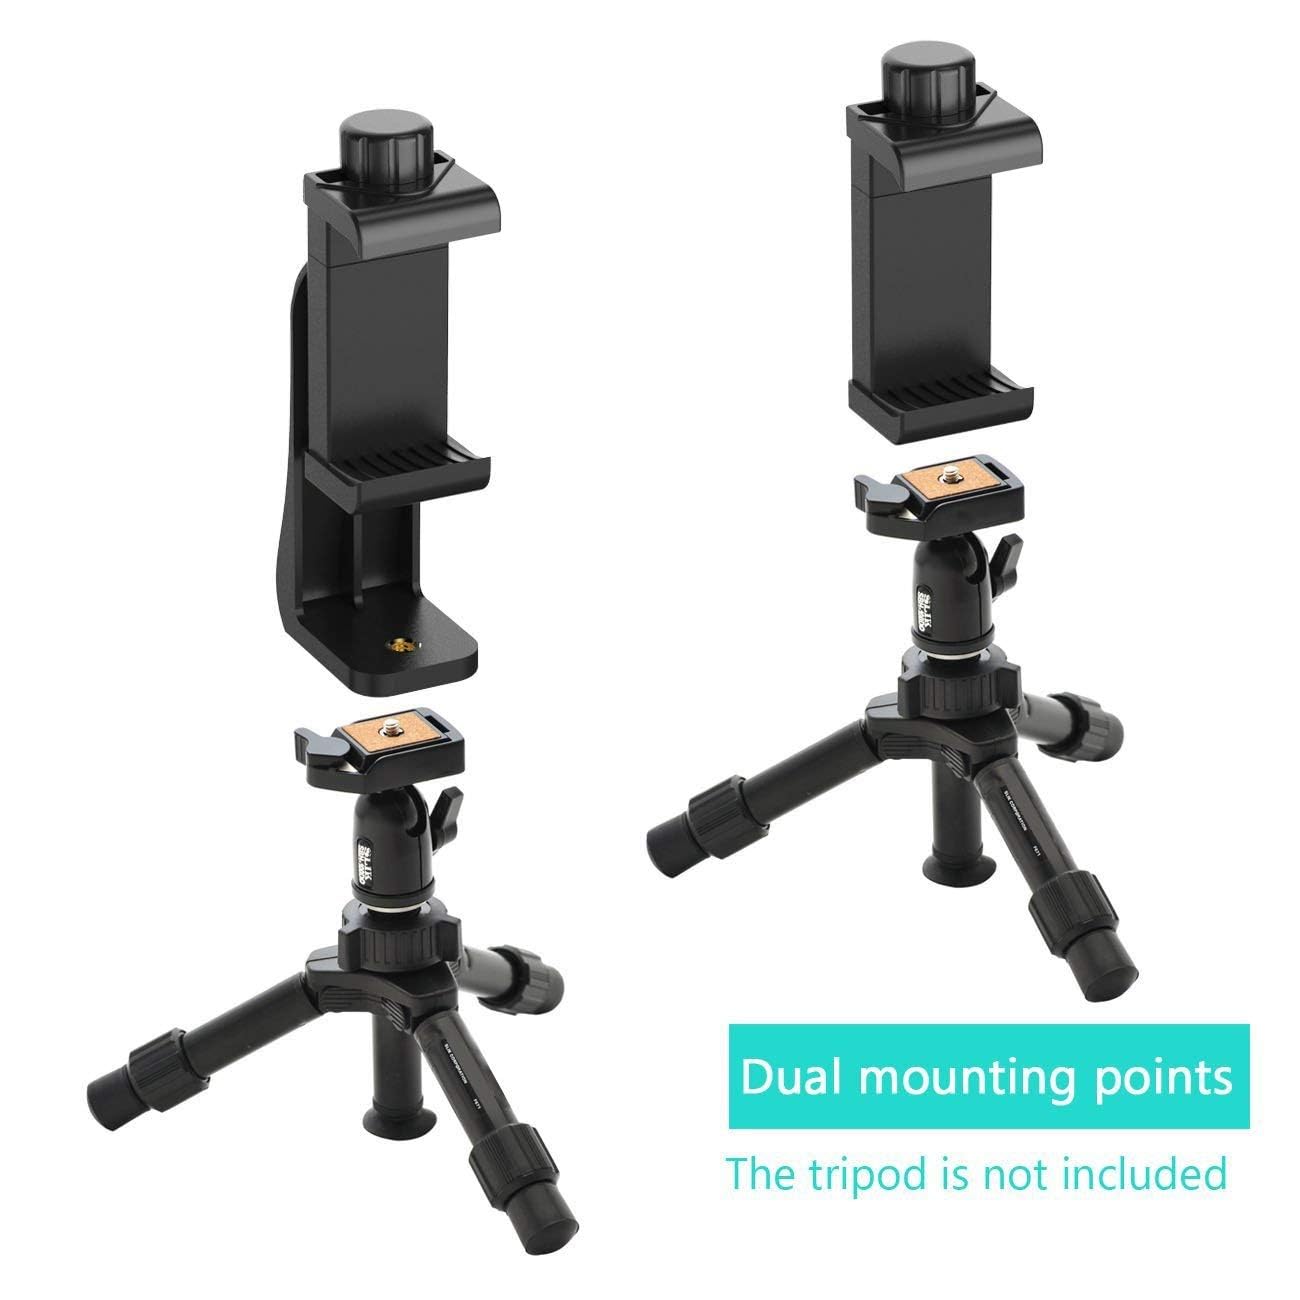 Tripod Phone Holder | Tripod Phone Mount Adapter Clip | Selfie Monopod Adjustable Clamp for Taking Magic Shots Pics Videos Compatible with All Smartphones